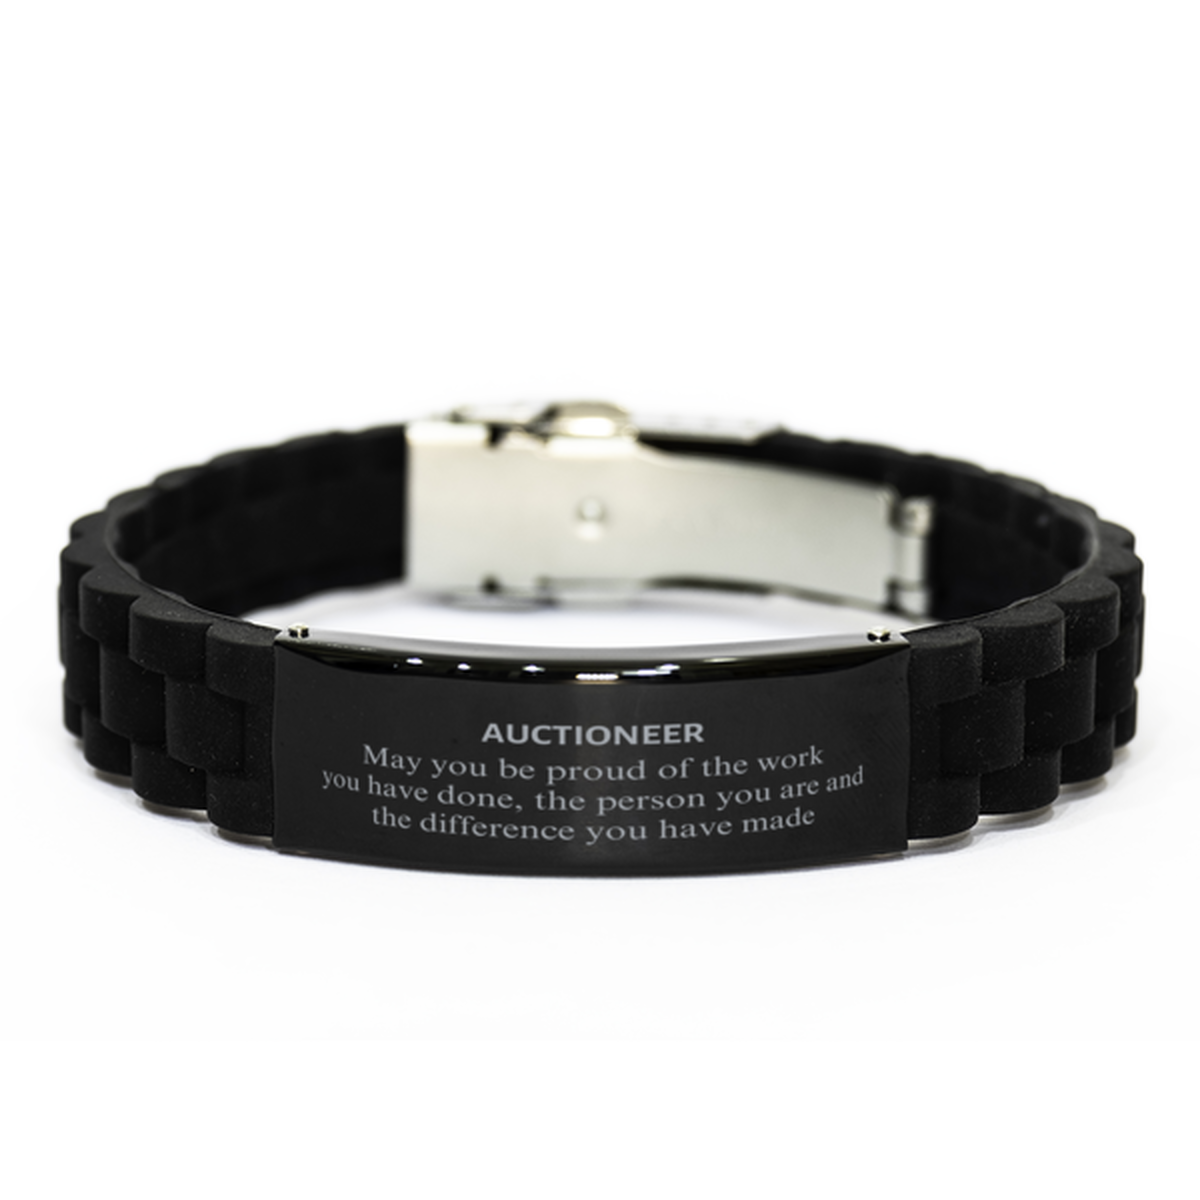 Auctioneer May you be proud of the work you have done, Retirement Auctioneer Black Glidelock Clasp Bracelet for Colleague Appreciation Gifts Amazing for Auctioneer